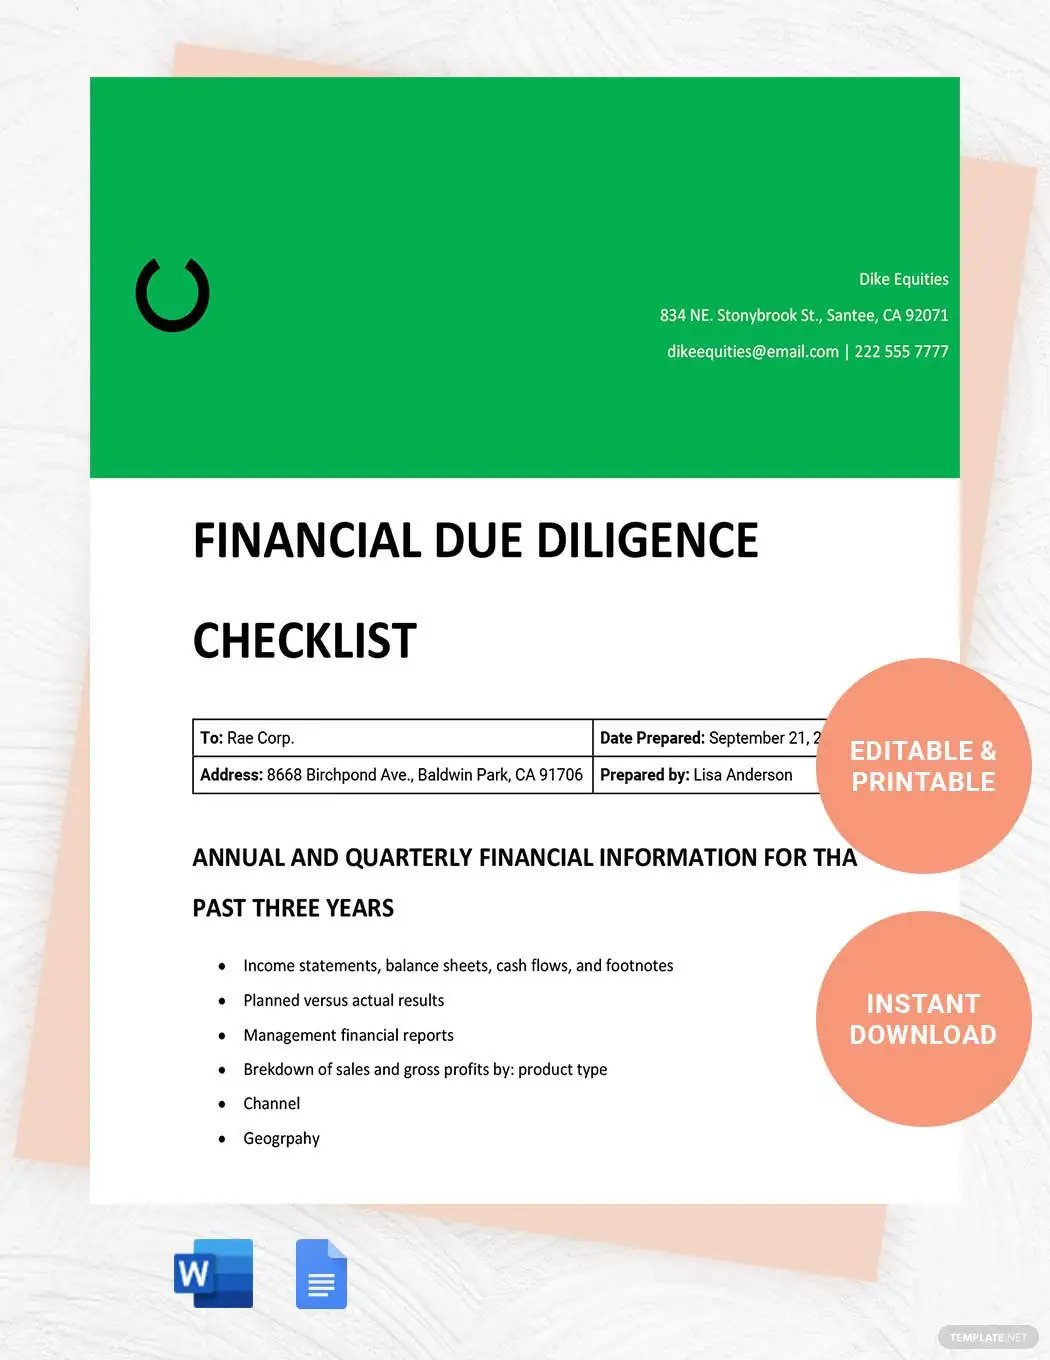 financial due diligence ideas and examples